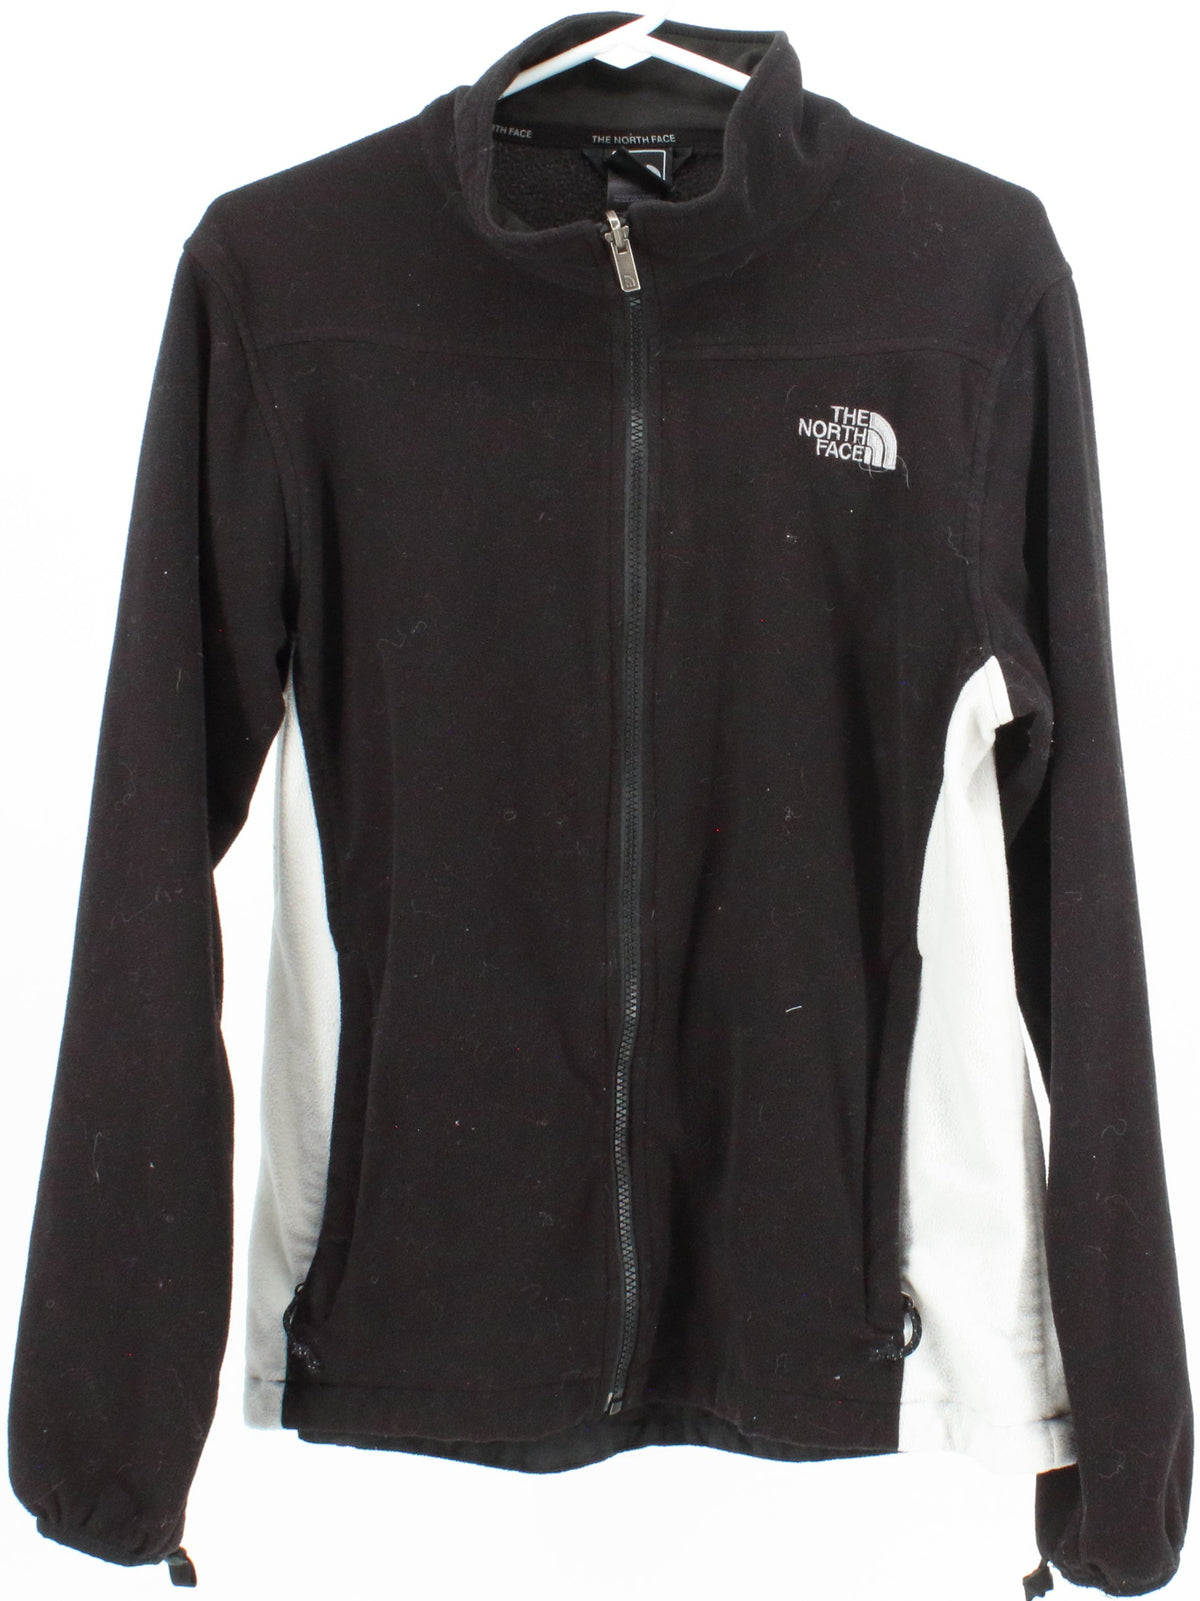 The North Face Women's Black and White Fleece